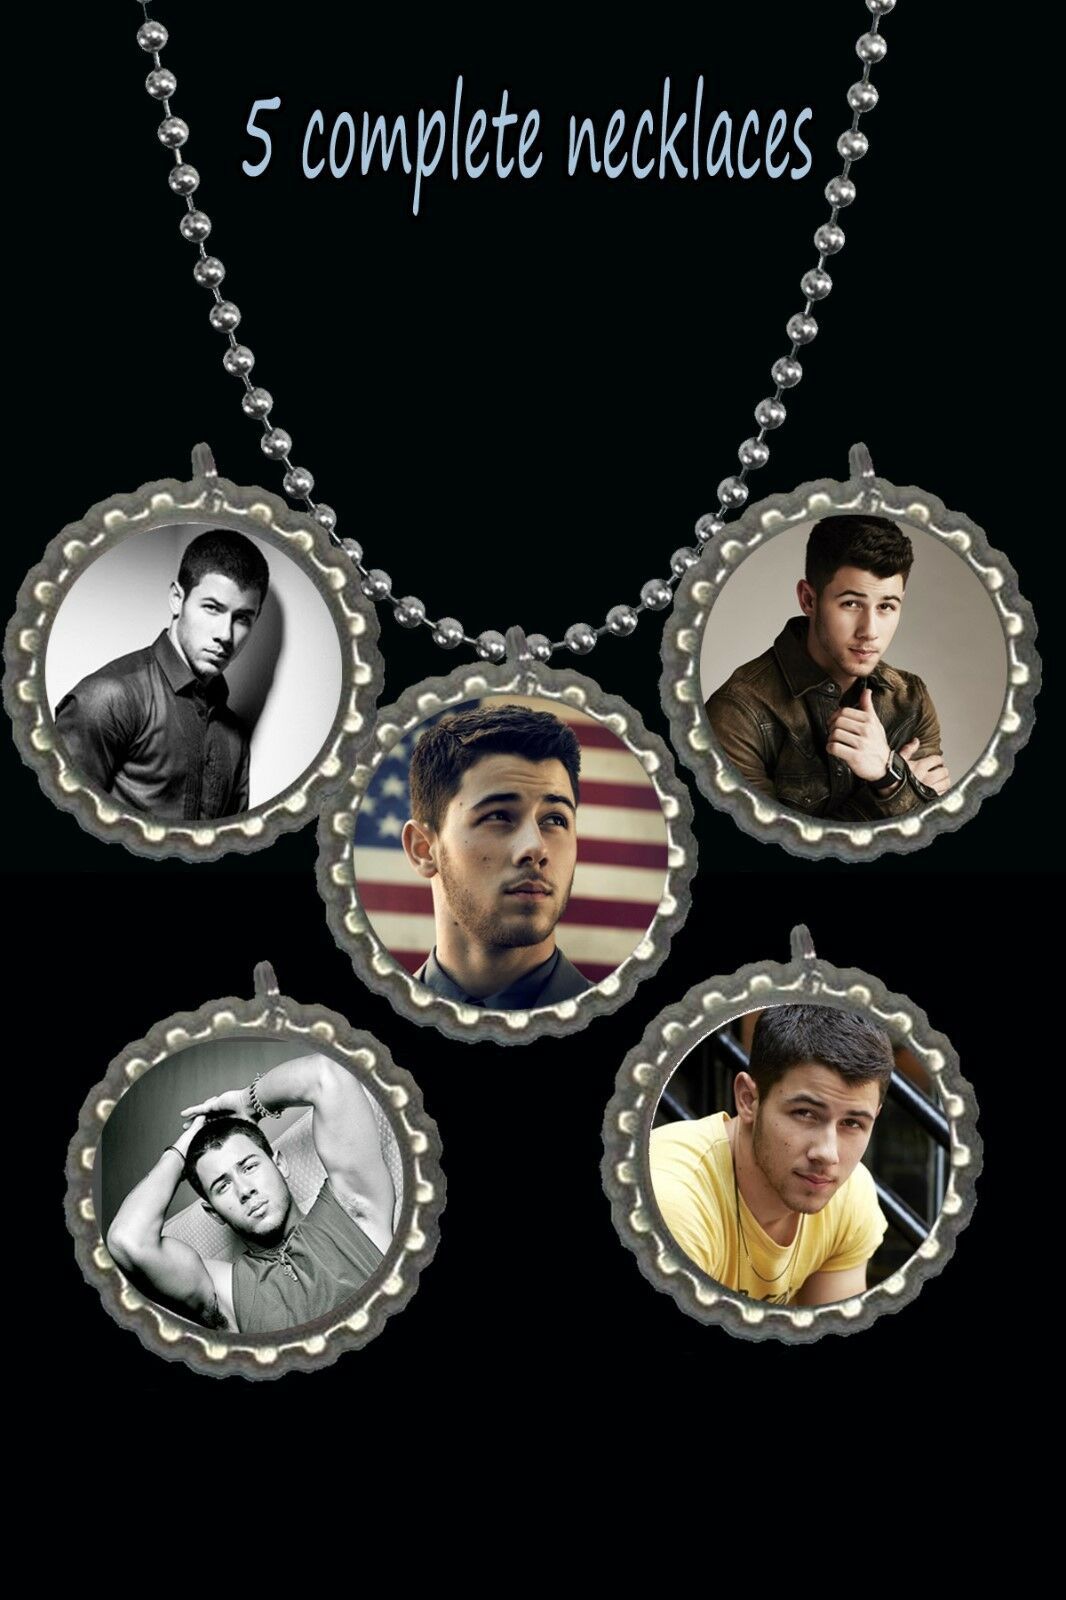 Primary image for Nick Jonas lot of 5 necklaces necklace party favors teen crush singer music